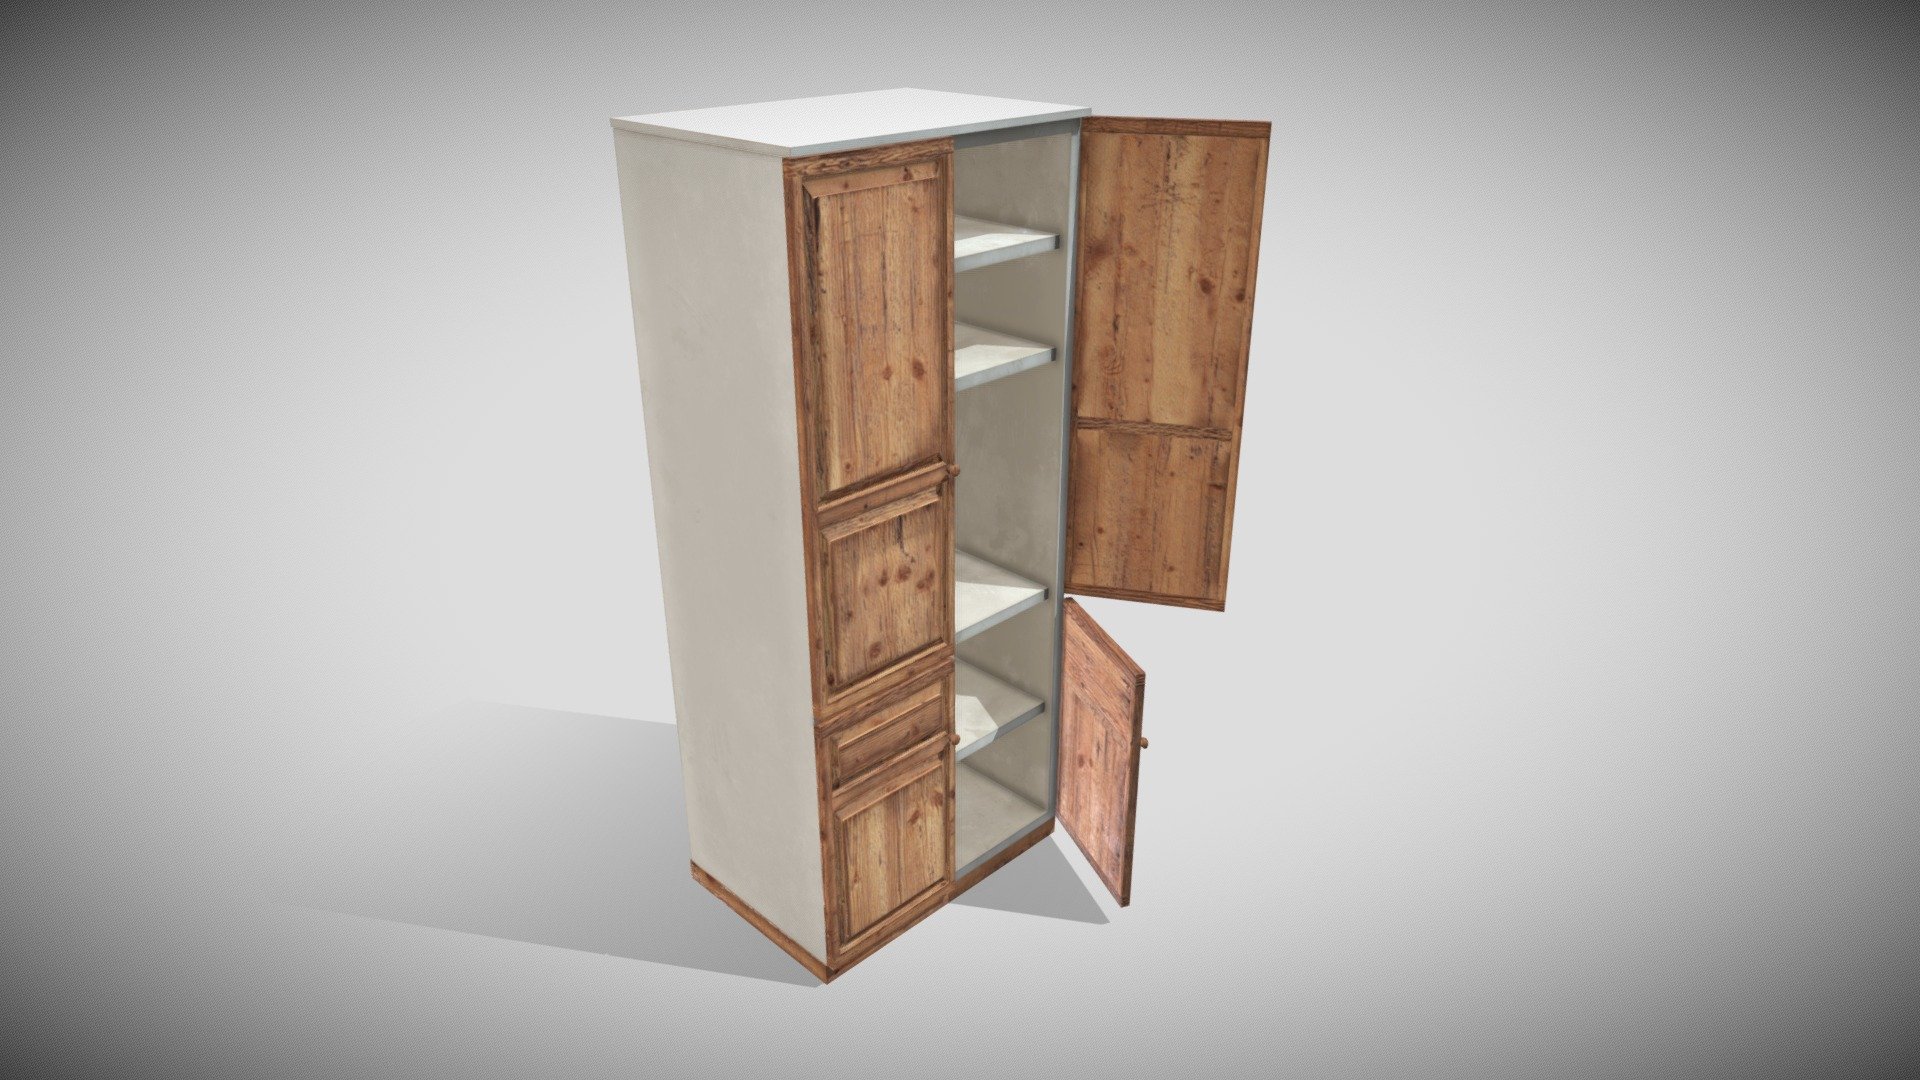 One Material PBR 4k Metalness

Pivot at Zero Bottom

Size OK

Door are separate objects with Pivot in right place and can be animated

Complete Compilatio https://skfb.ly/ovXFn - Kitchen Modules - Mod D - Buy Royalty Free 3D model by Francesco Coldesina (@topfrank2013) 3d model